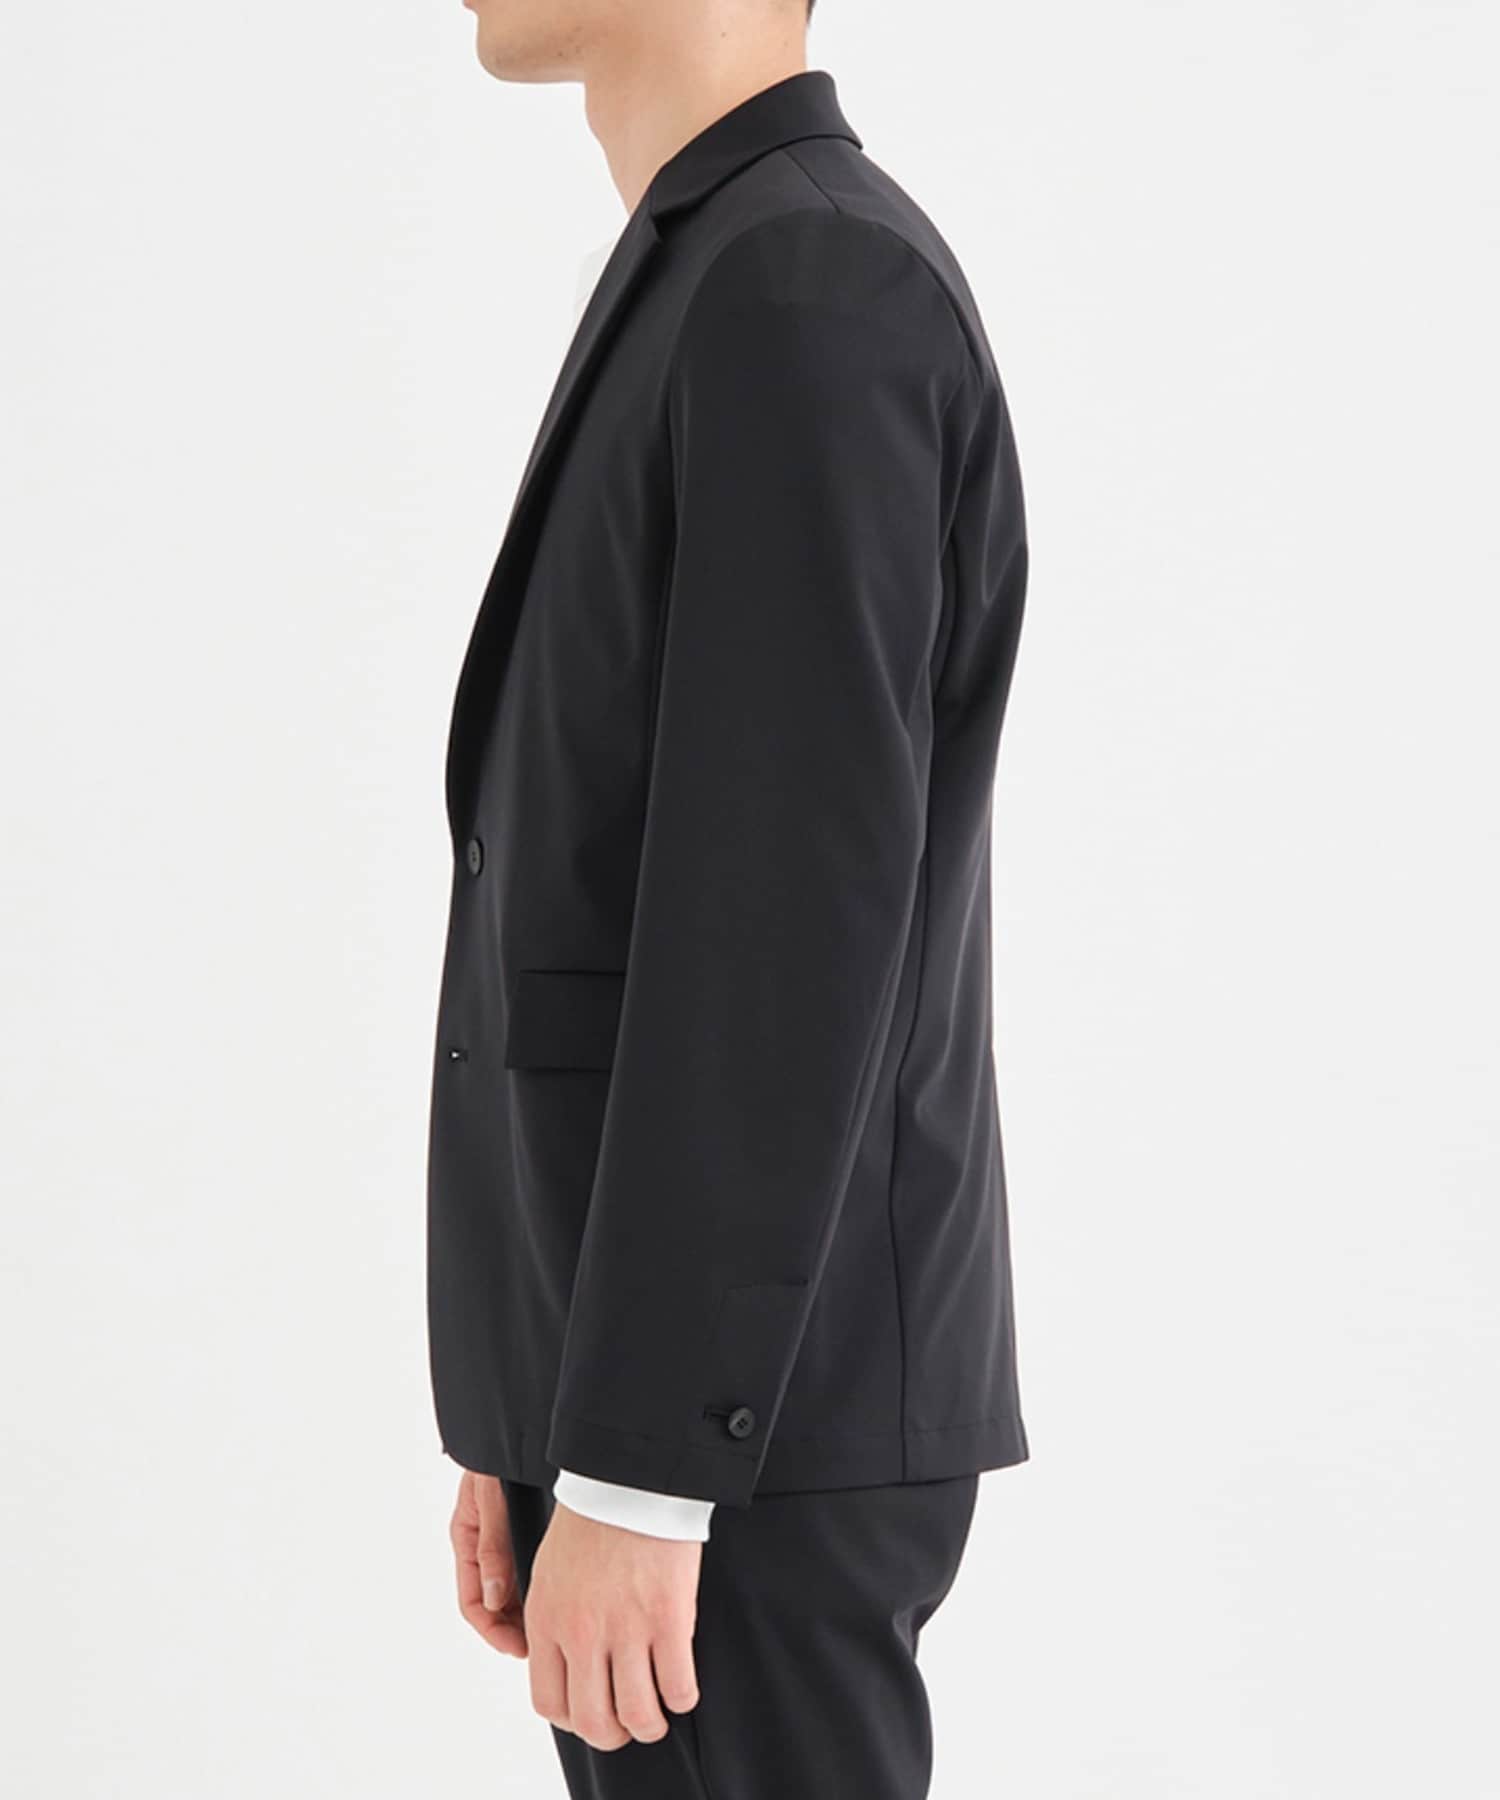 Washable High Function Jersey Shape Jacket THE TOKYO